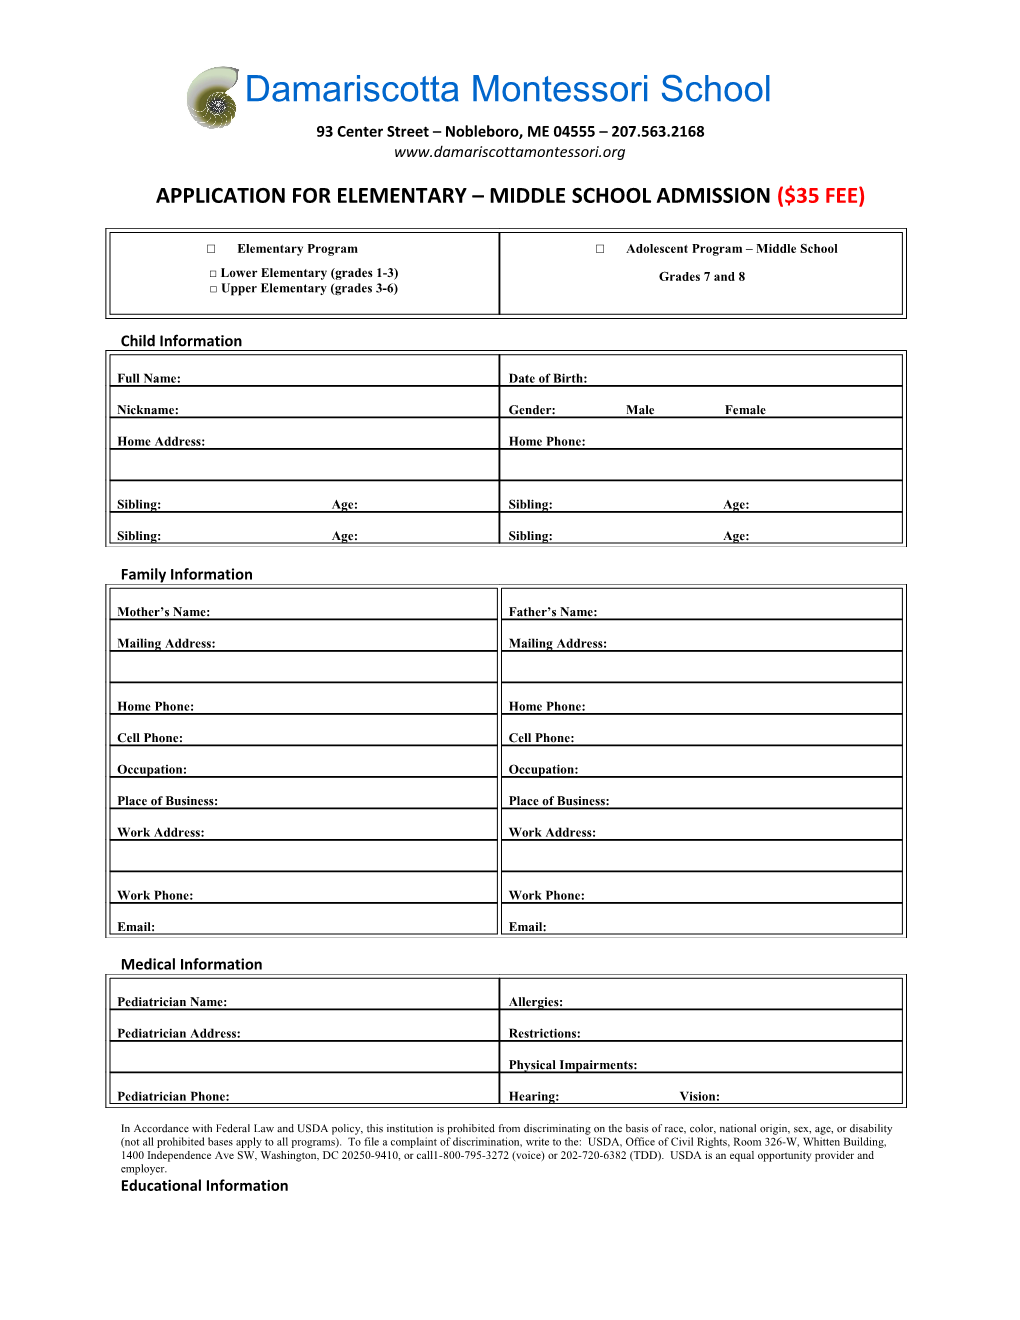 Application for Elementary Middle School Admission($35 Fee)